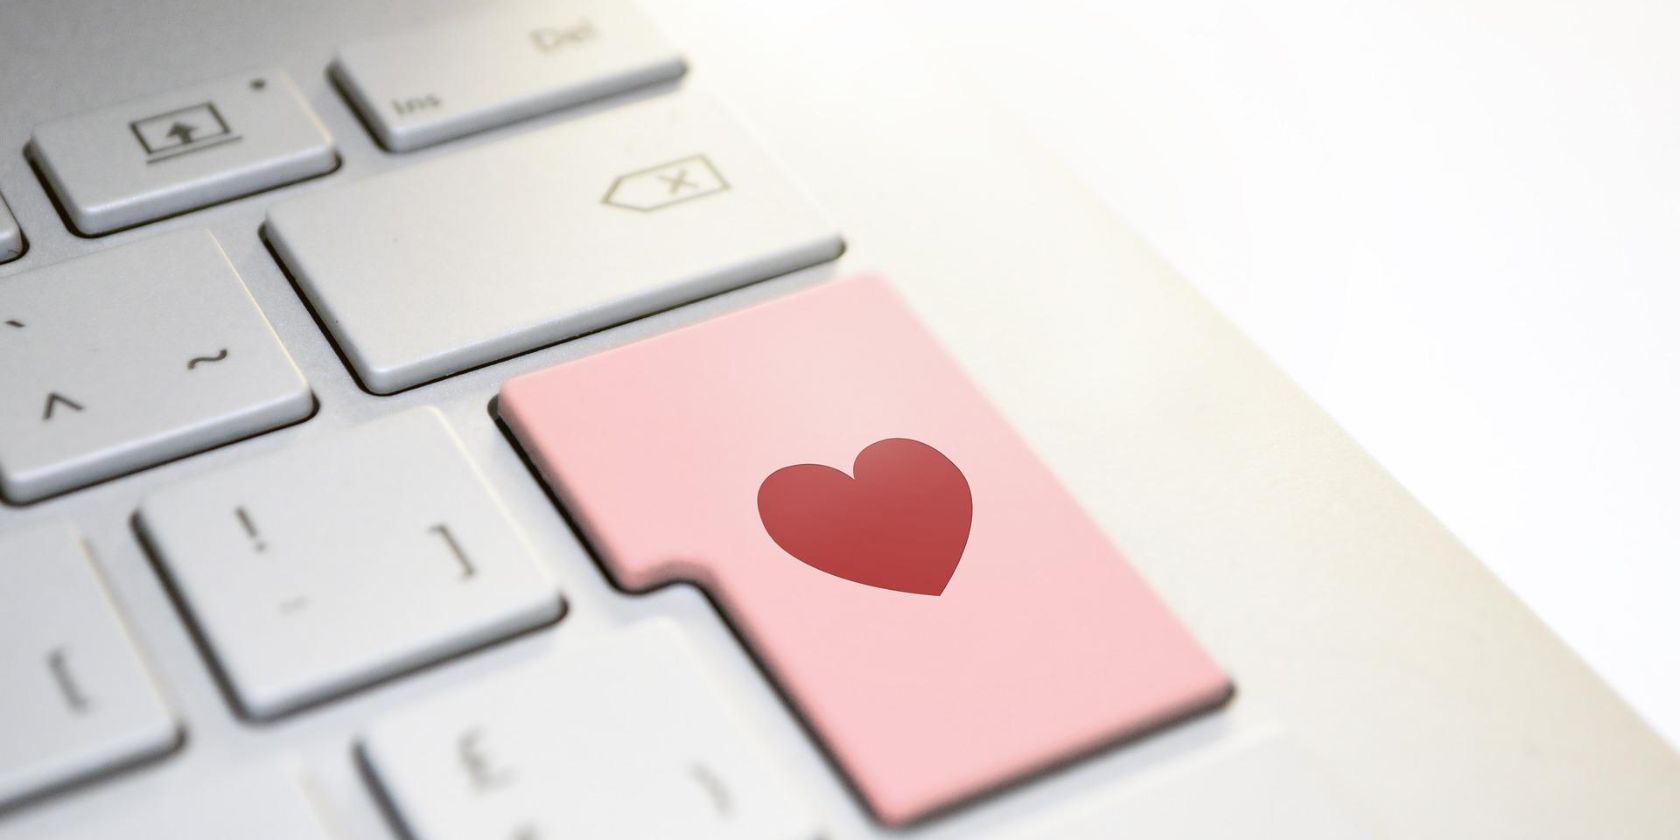 A keyboard with a love heart on the enter key